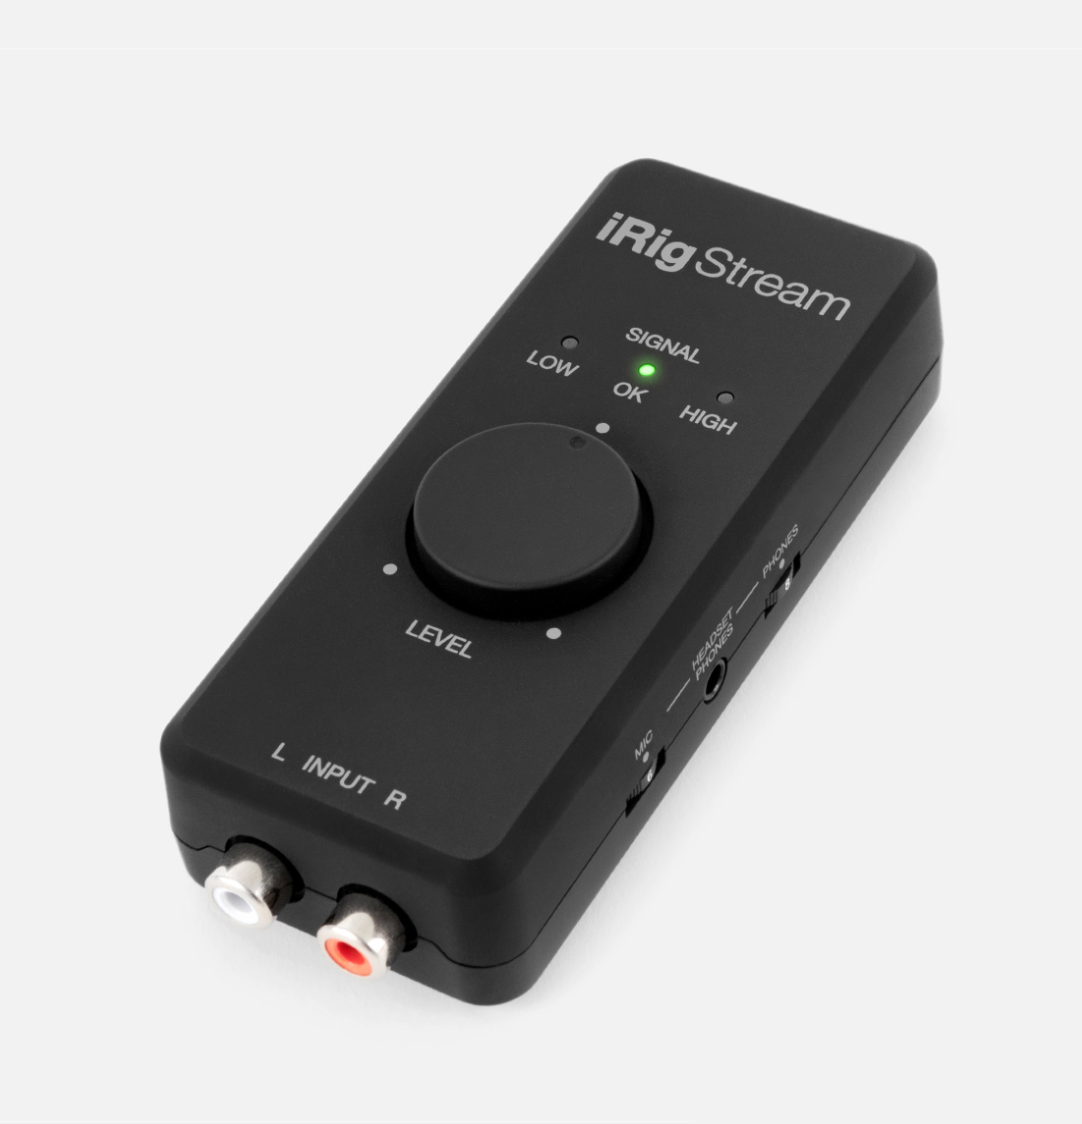 IK Multimedia iRig Stream 2-Channel Audio Interface for iPhone, iPad,  Android and Mac/PC